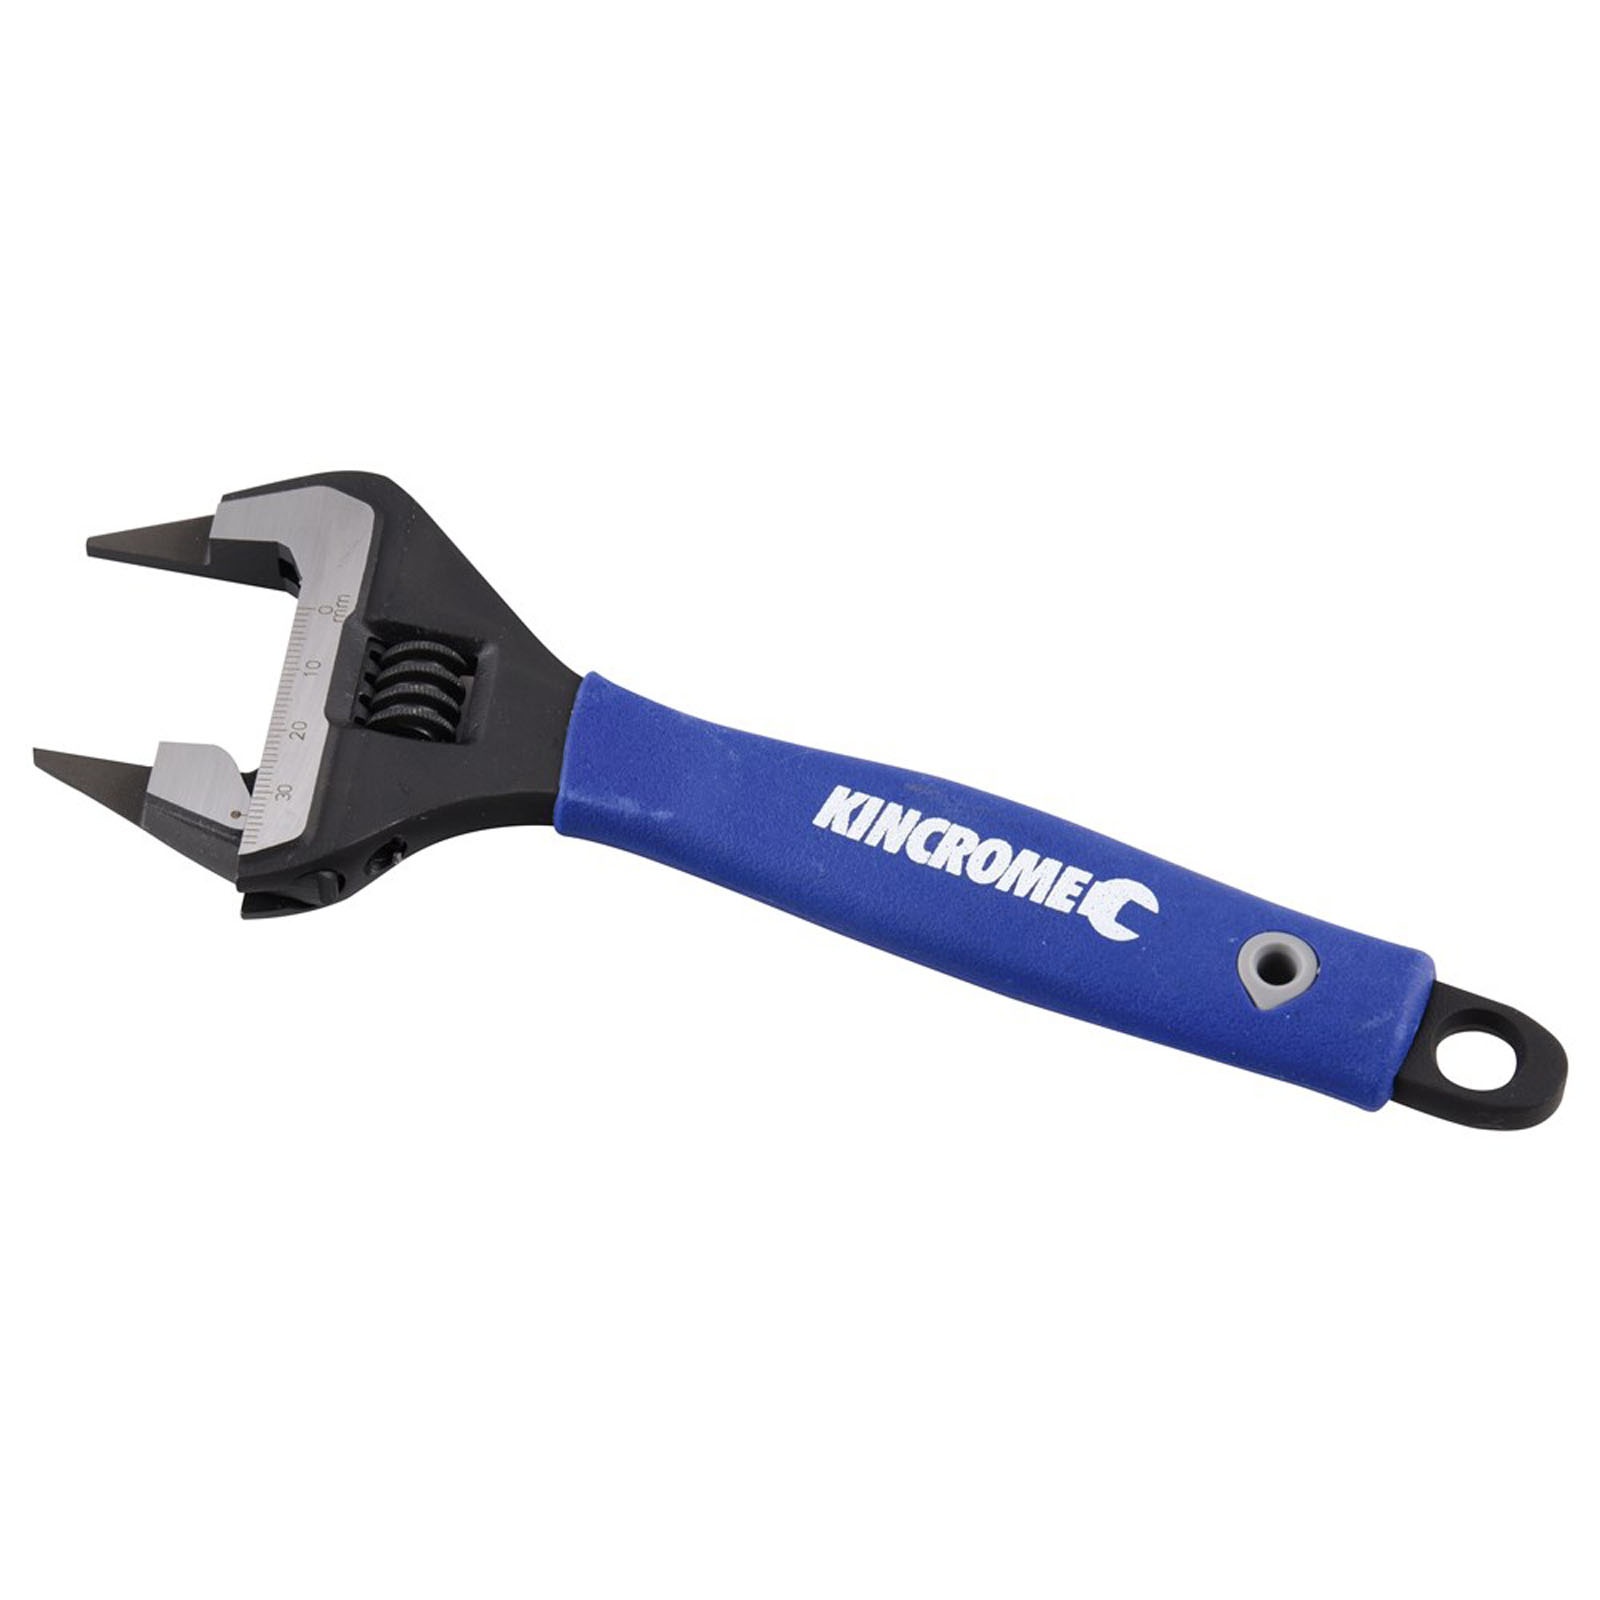 Adjustable Wrench - Thin Jaw 200mm (8